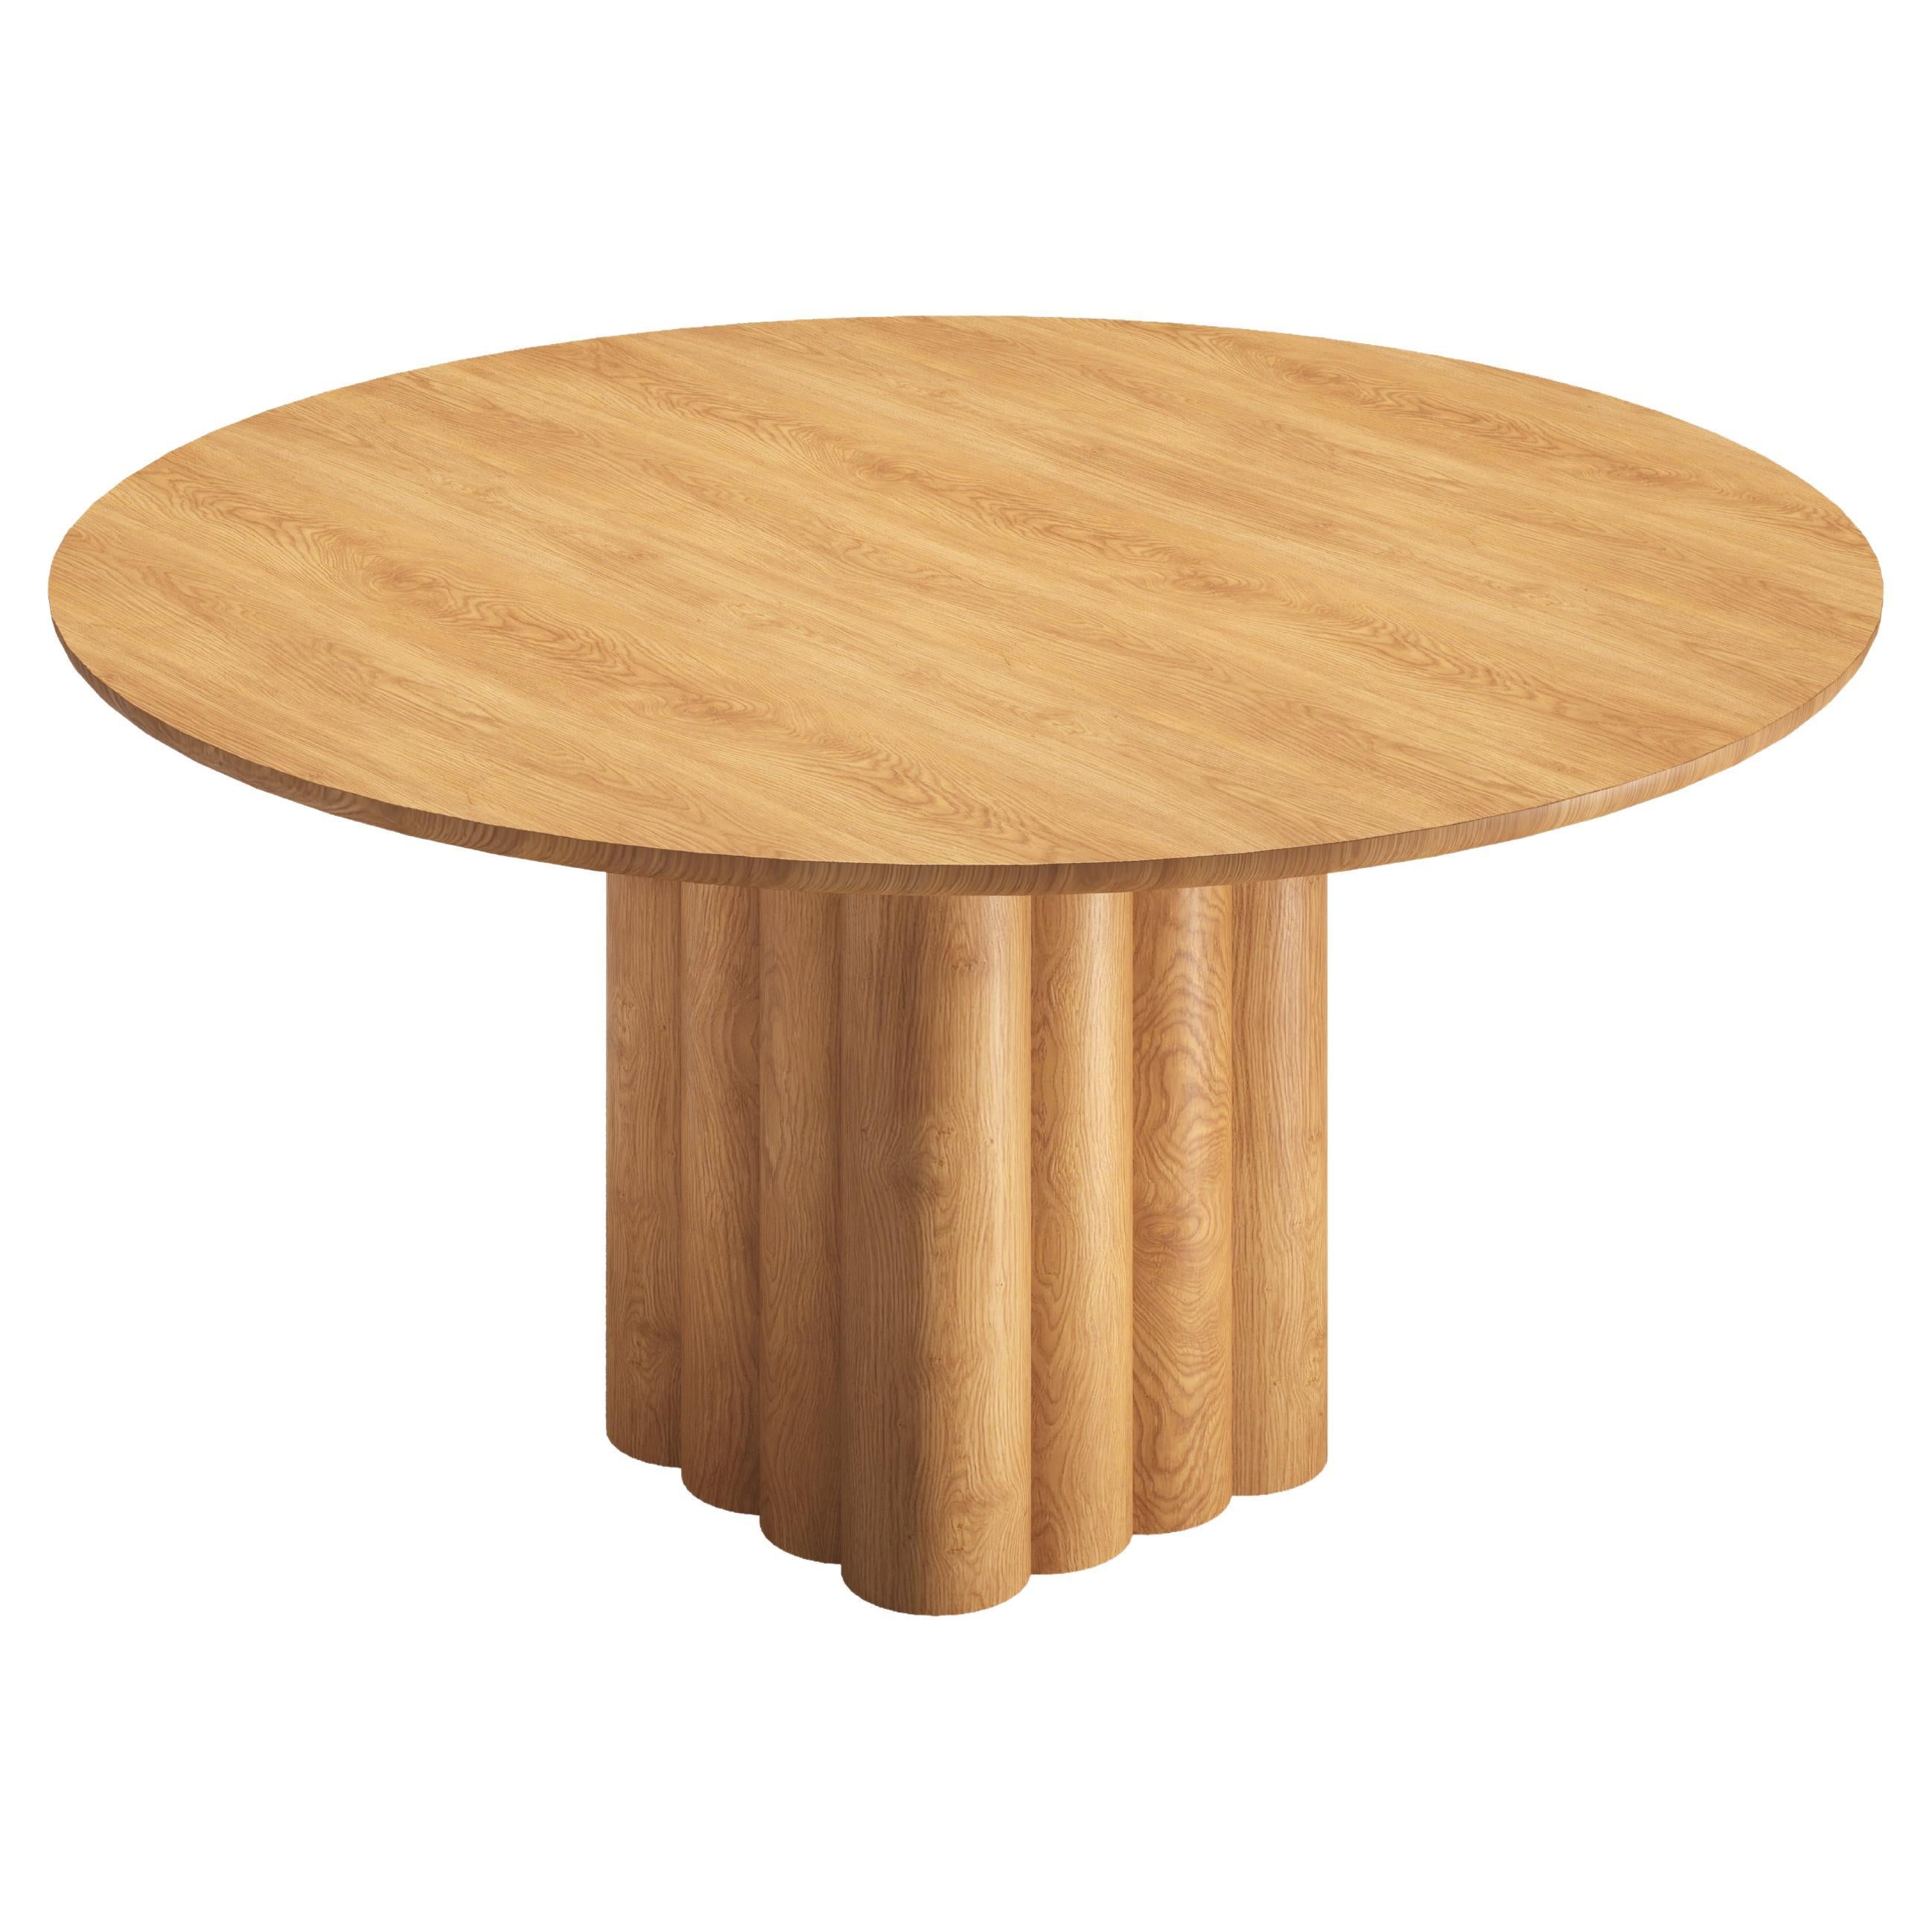 Round Dining Table 'Plush' by Dk3, Natural Oak, 160 cm